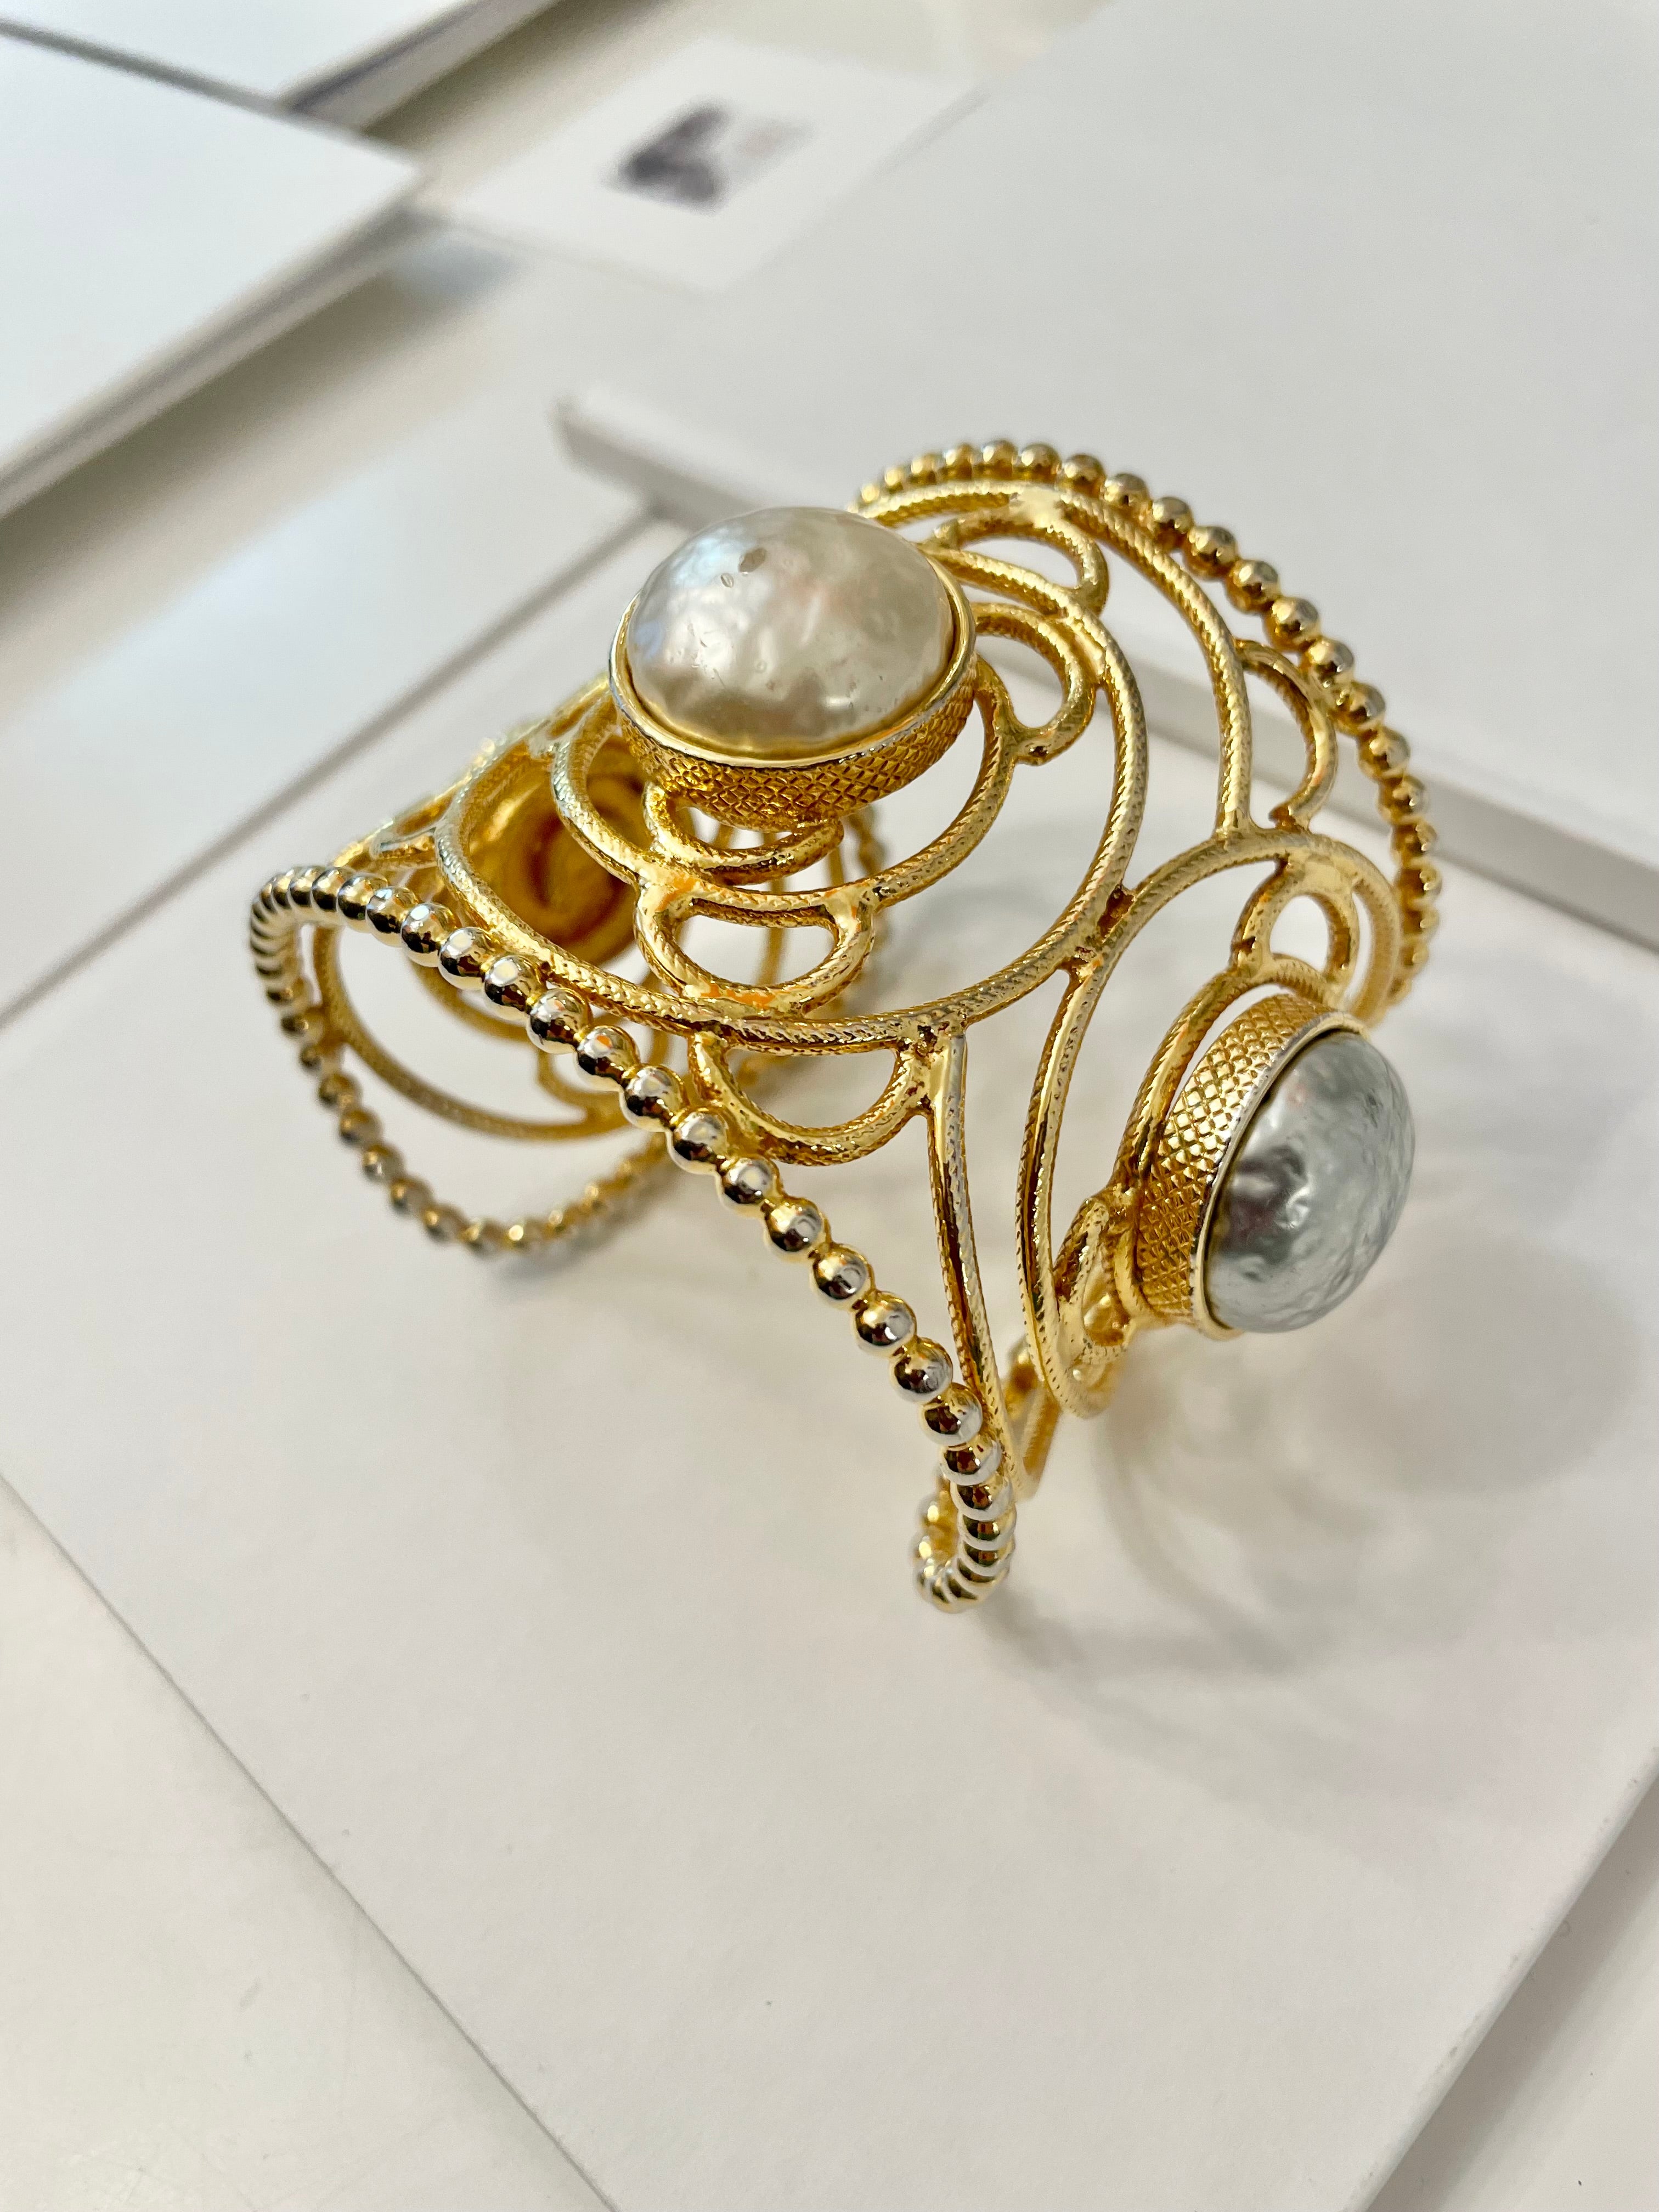 Stunning Faux pearl sculpted gold couture cuff bracelet by, Dominique Aurientis... so divine